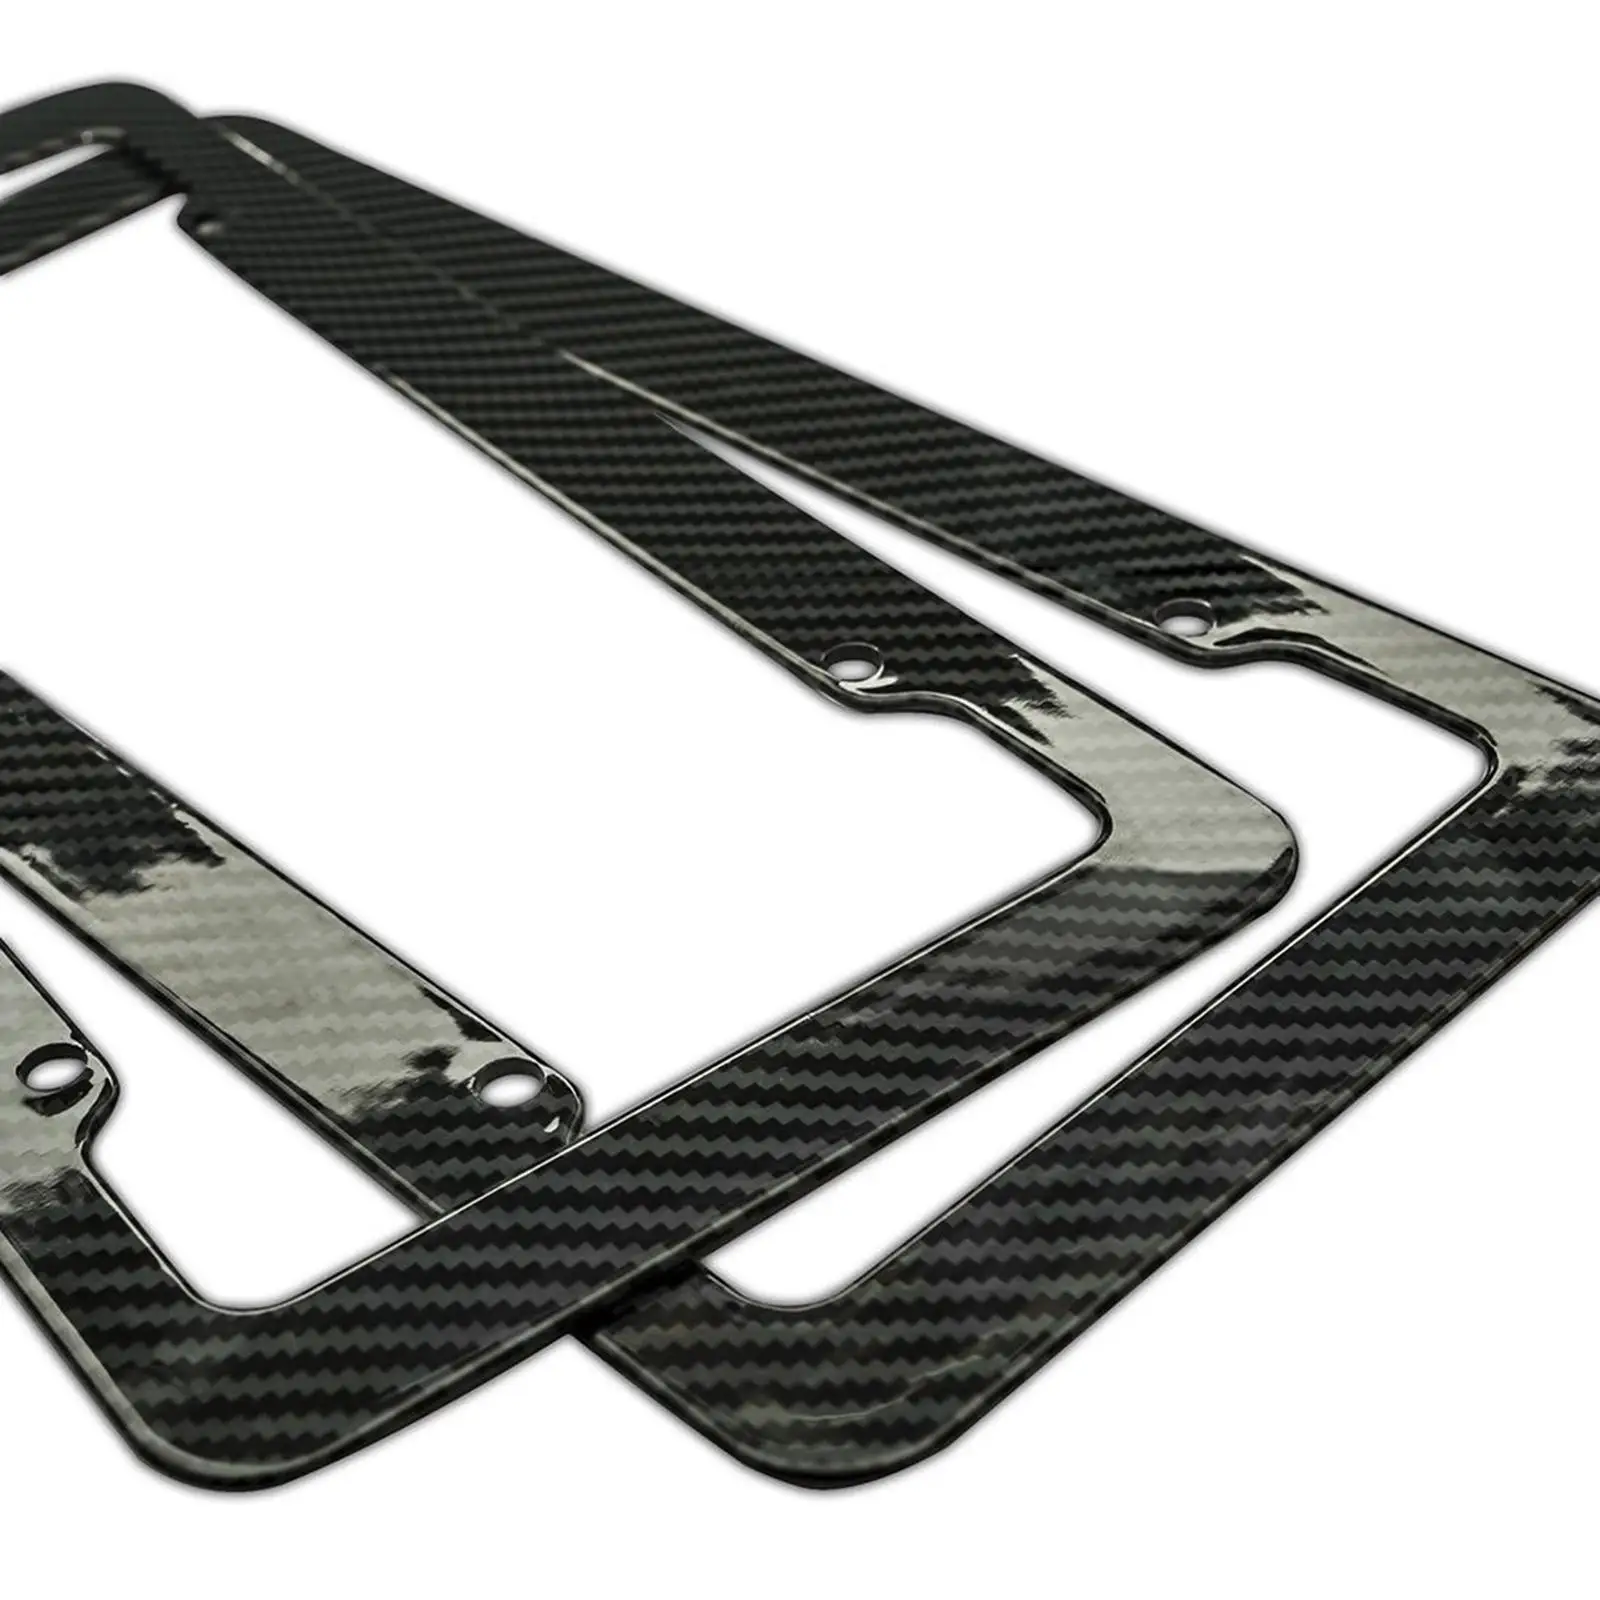 2Pcs Carbon Fiber License Frames with Screws Holder Plate Covers Front and Rear for us Accessories Durable